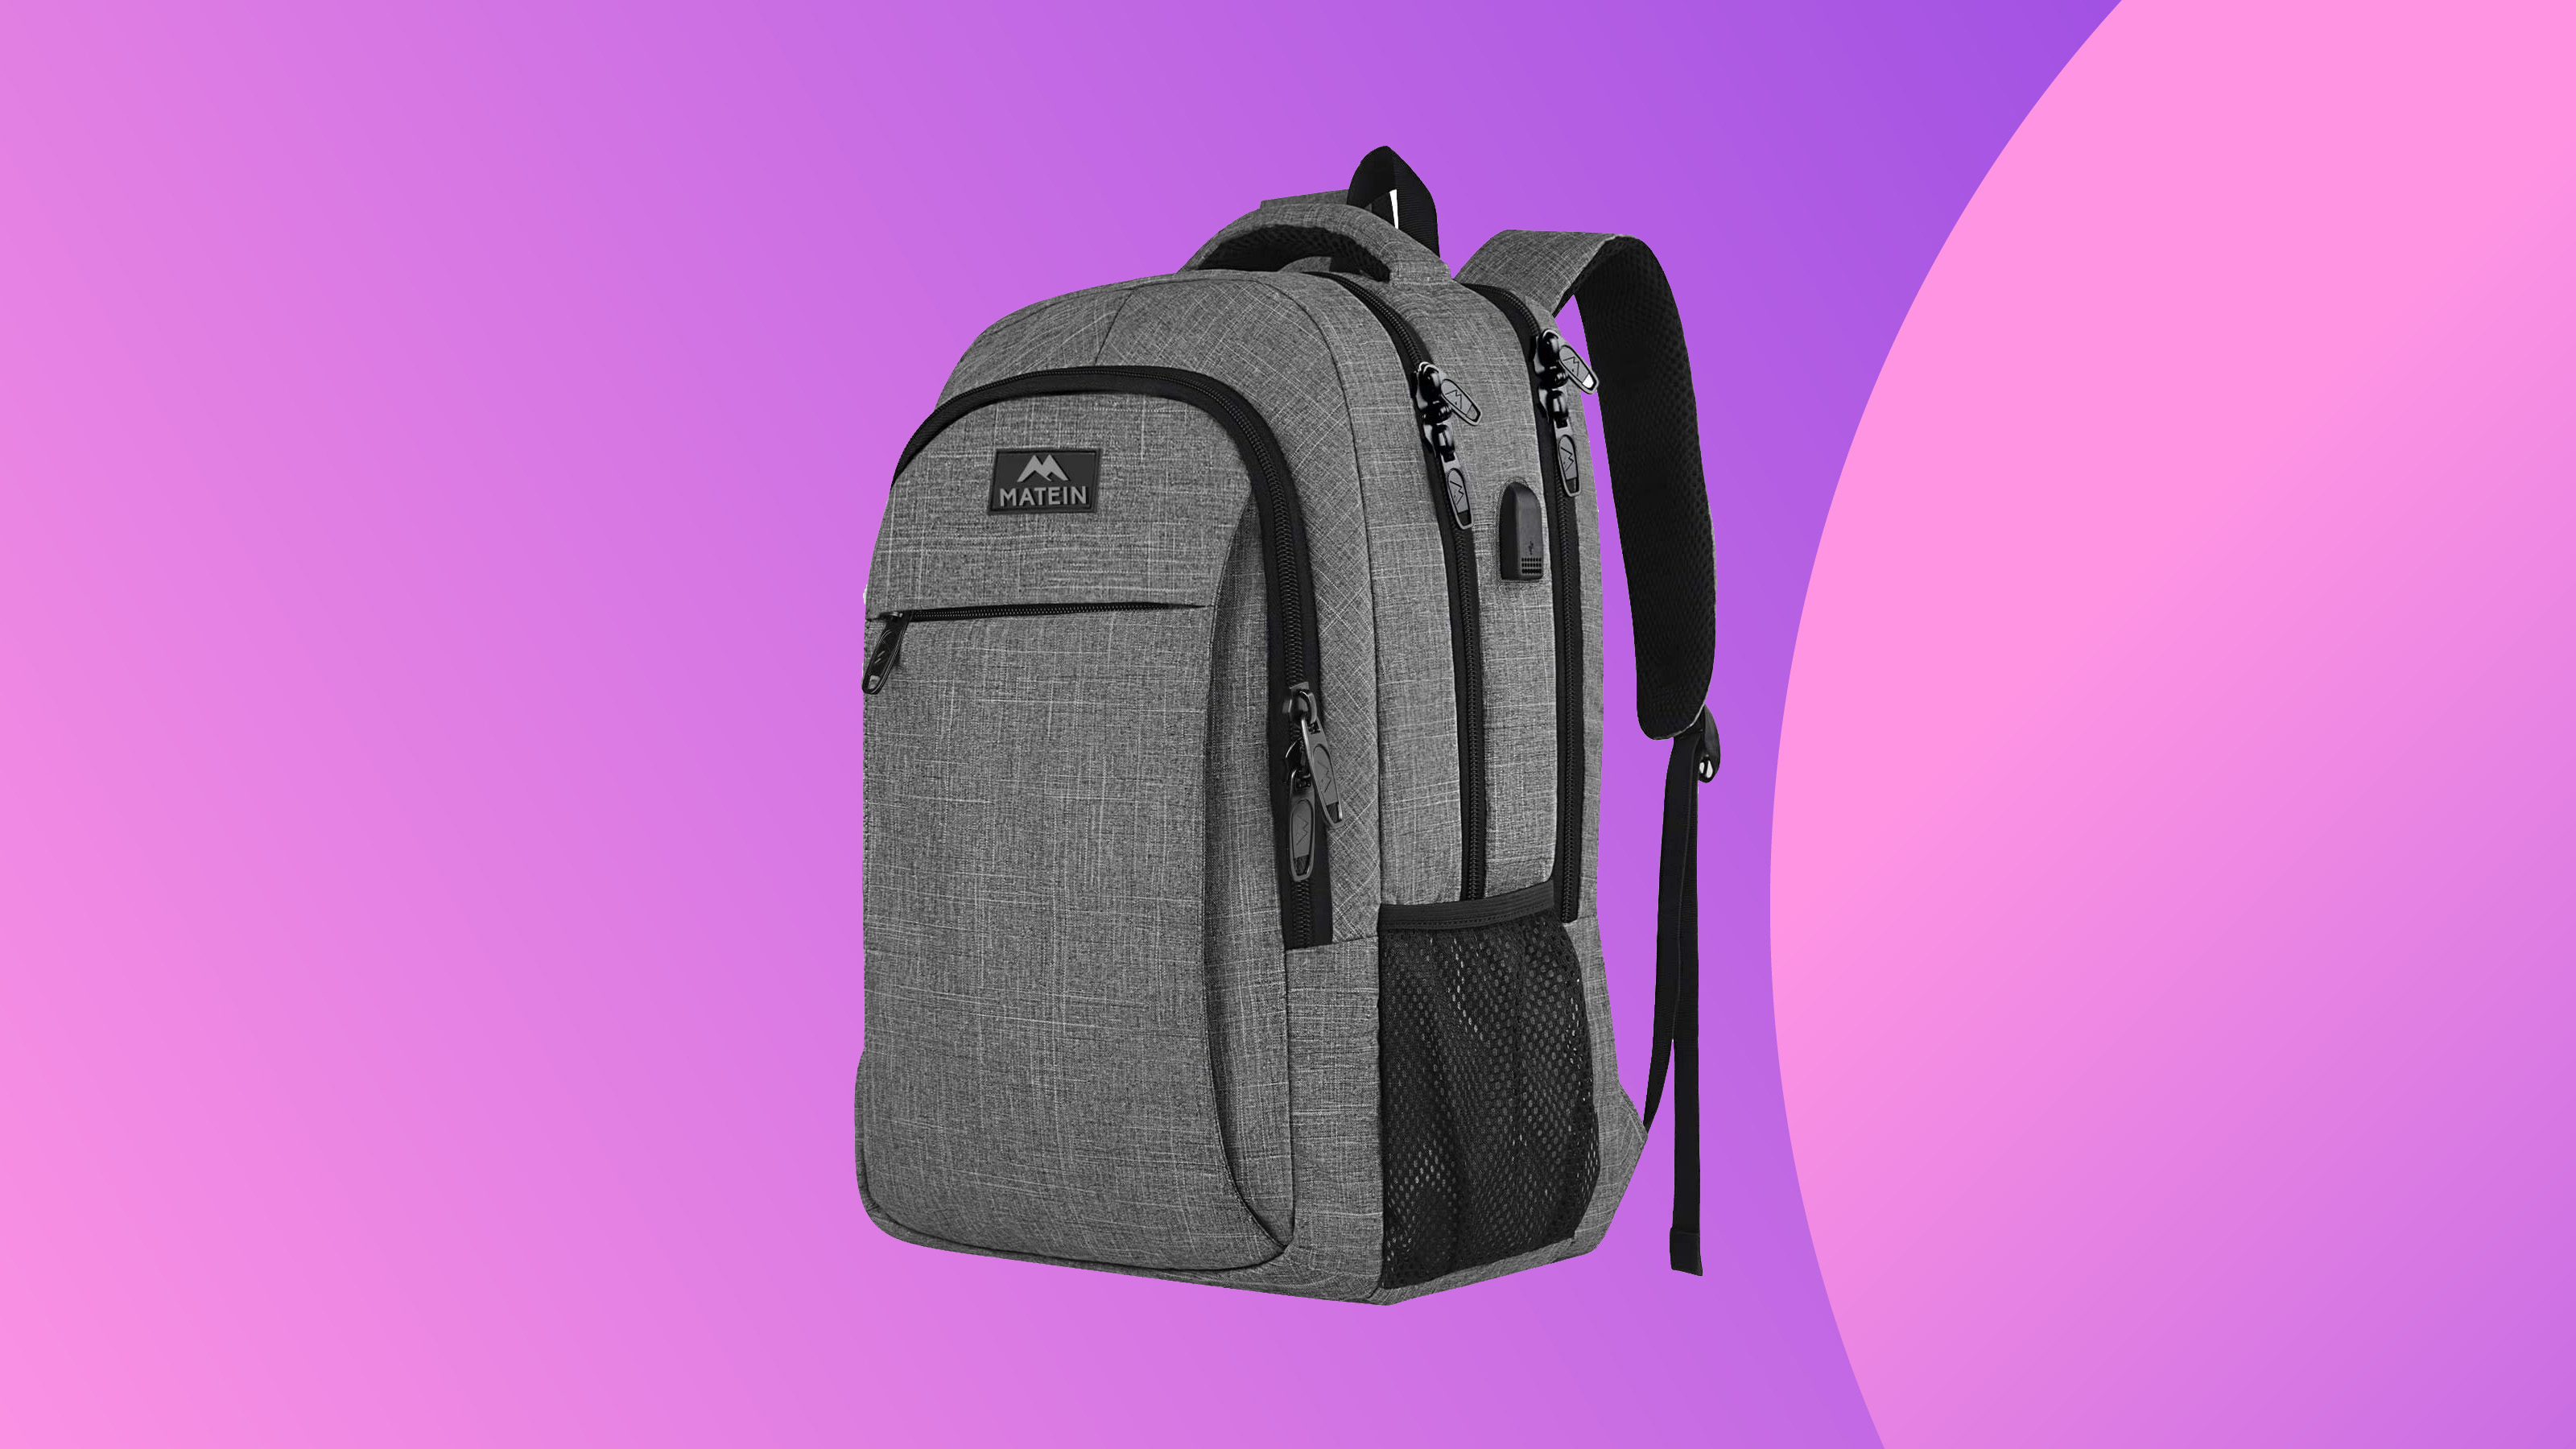 A product shot of the MATEIN laptop backpack on a colourful background